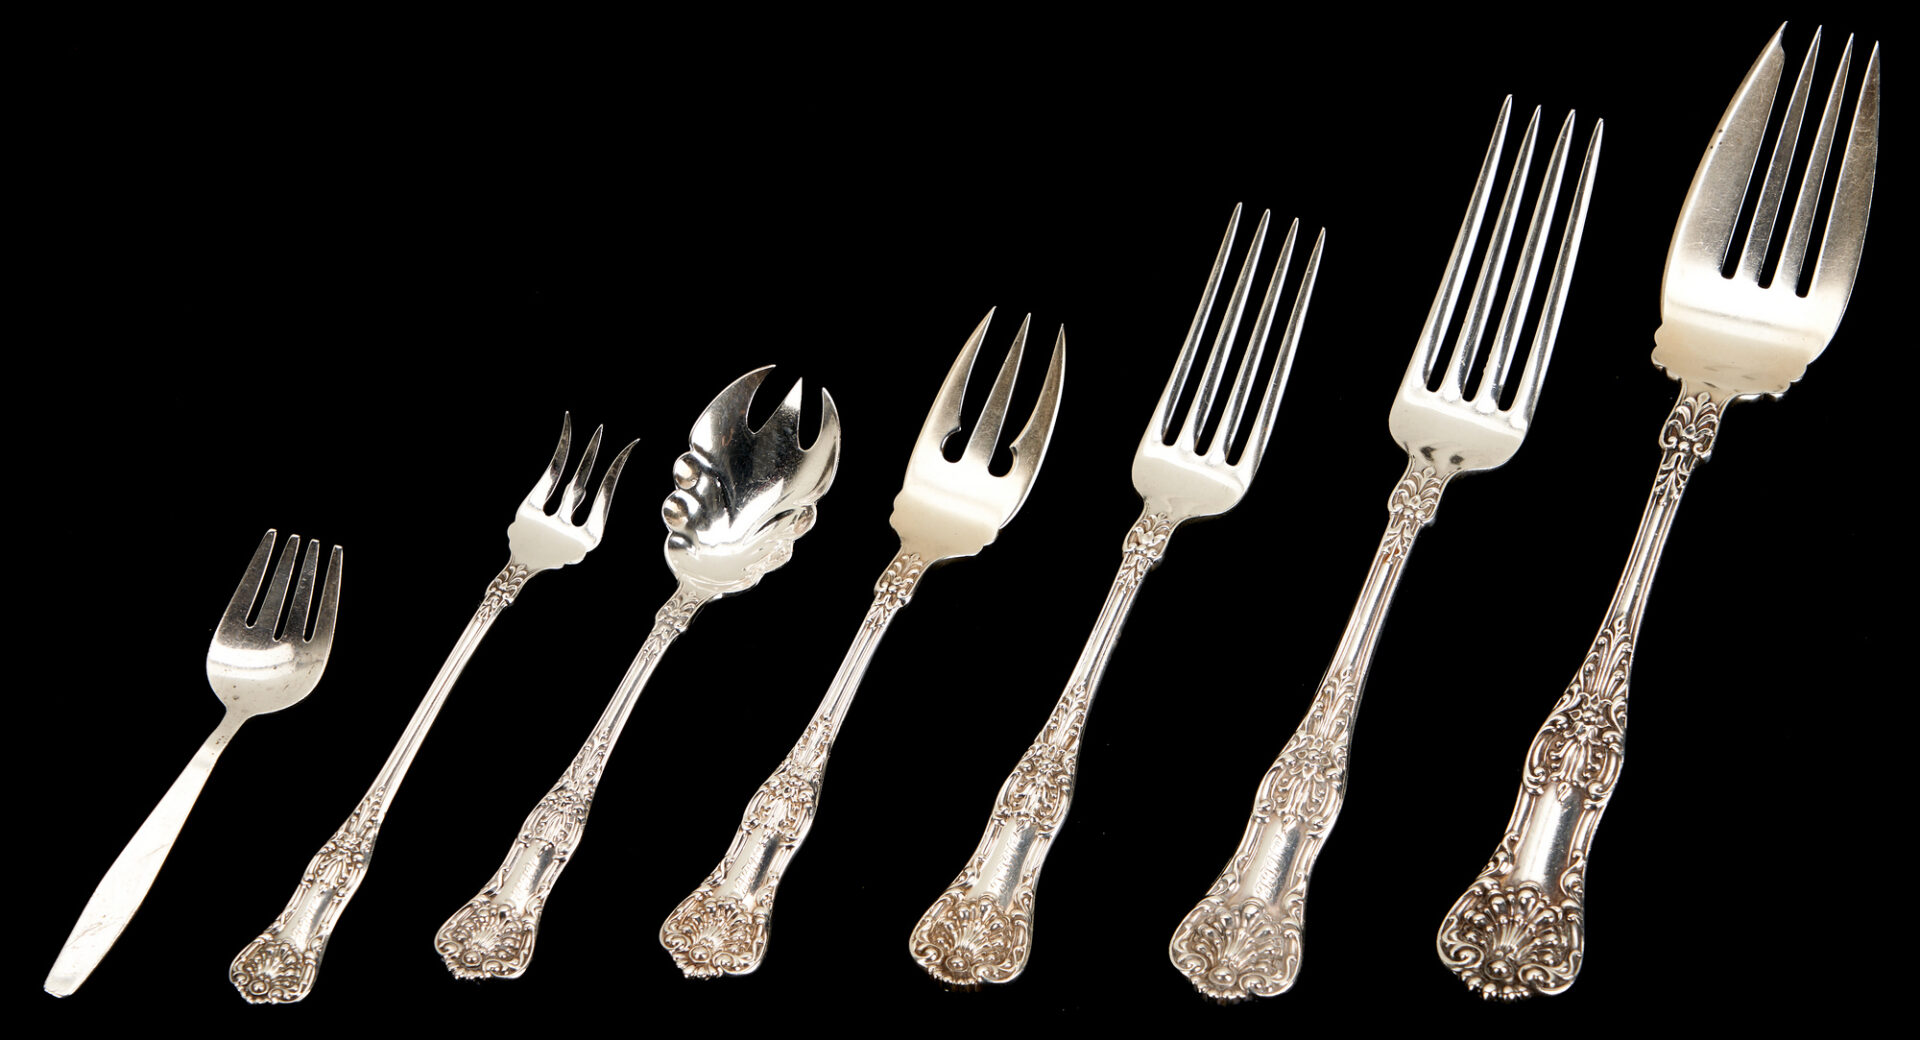 Lot 70: Dominick and Haff Sterling Silver New King Flatware, Svc. for 12, 173 Pcs Total